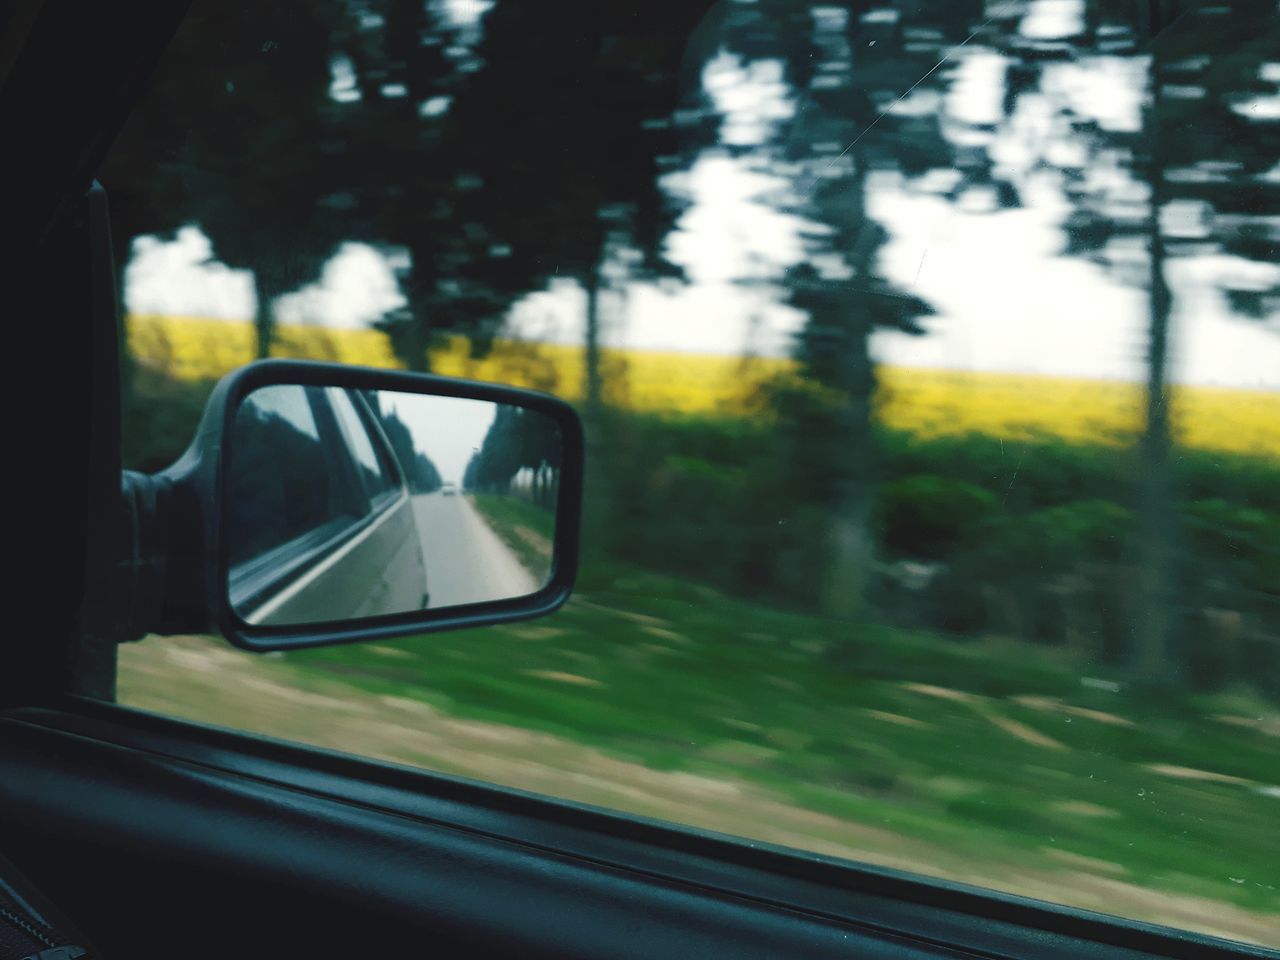 tree, window, side-view mirror, transportation, nature, mode of transport, day, landscape, no people, forest, outdoors, close-up, sky